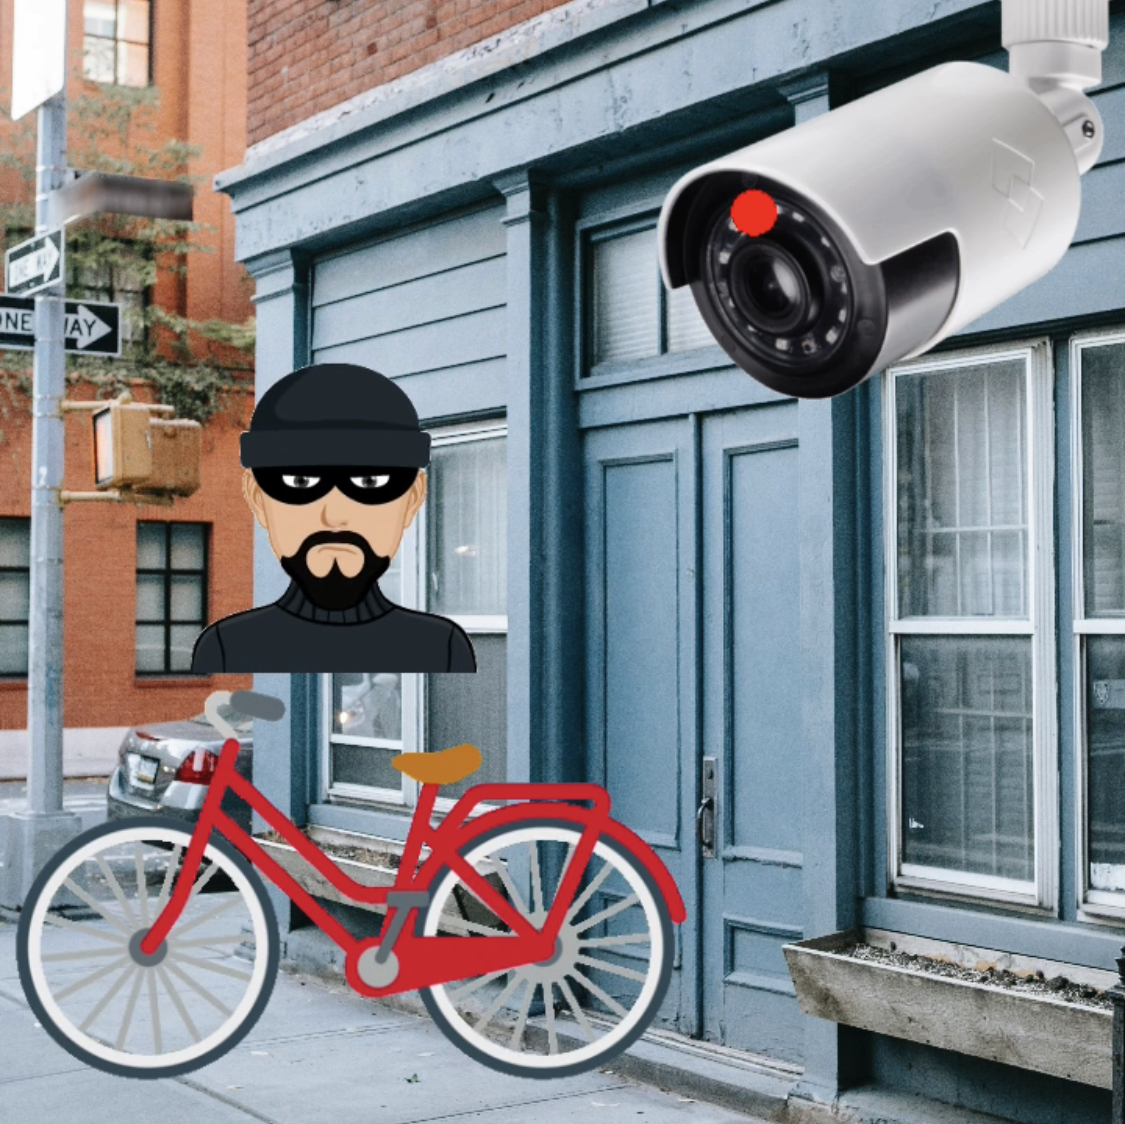 Bike Theft and Video & Lighting Surveillance Security Systems